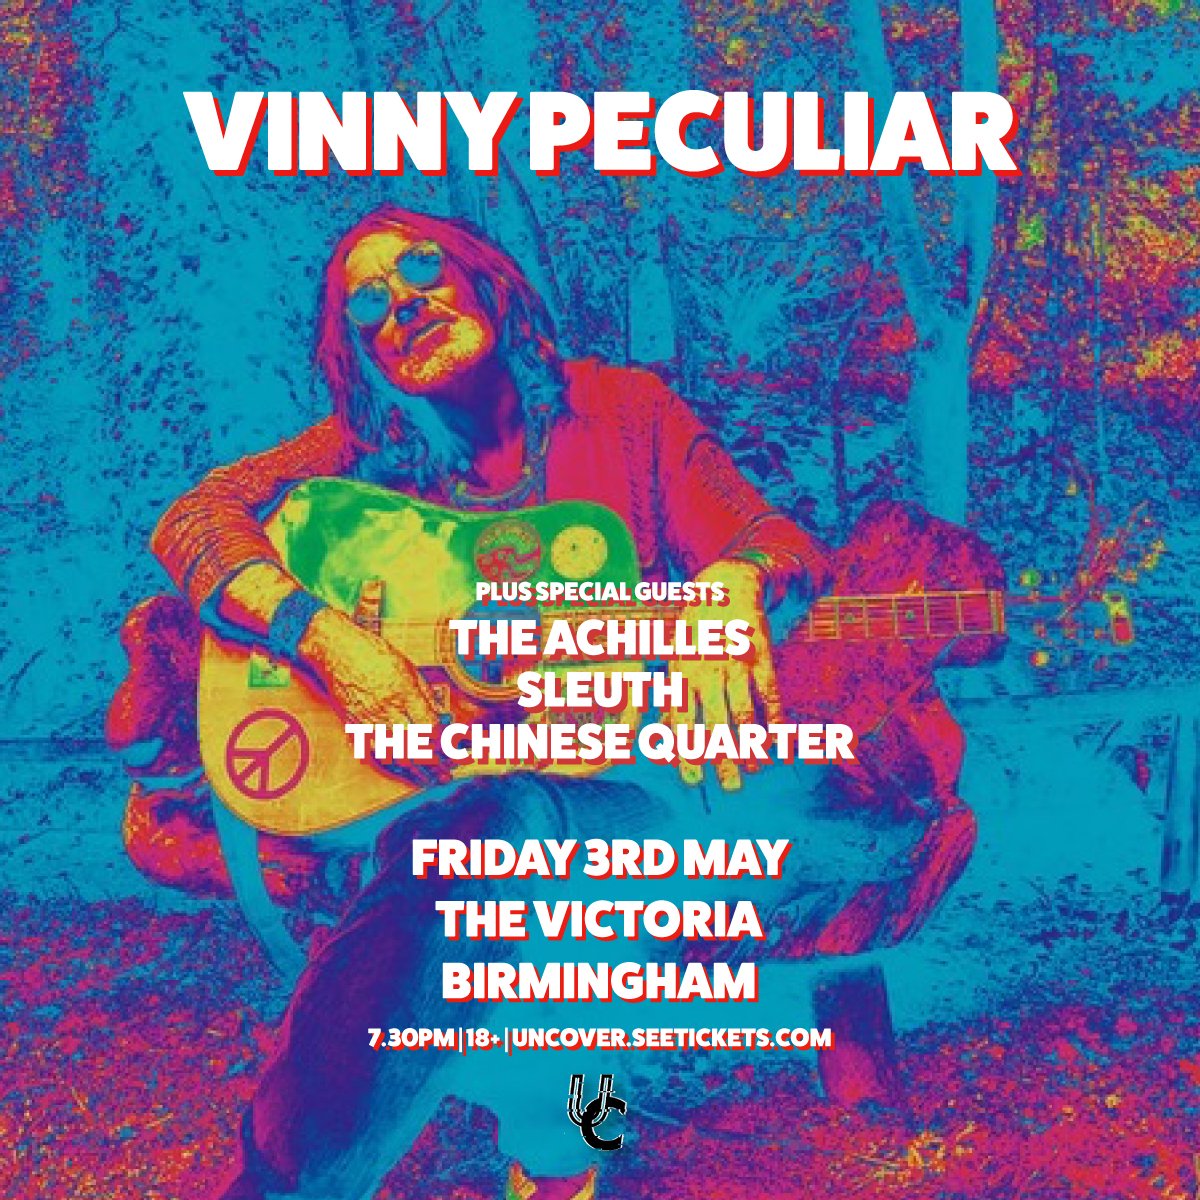 ONE MONTH TO GO 💙 @vinnypeculiar headlines @TheVictoria, Birmingham, on Friday, 3rd May, with special guests The Achilles, Sleuth and The Chinese Quarter 💥 Tickets on sale now: bit.ly/3QJ46Mz